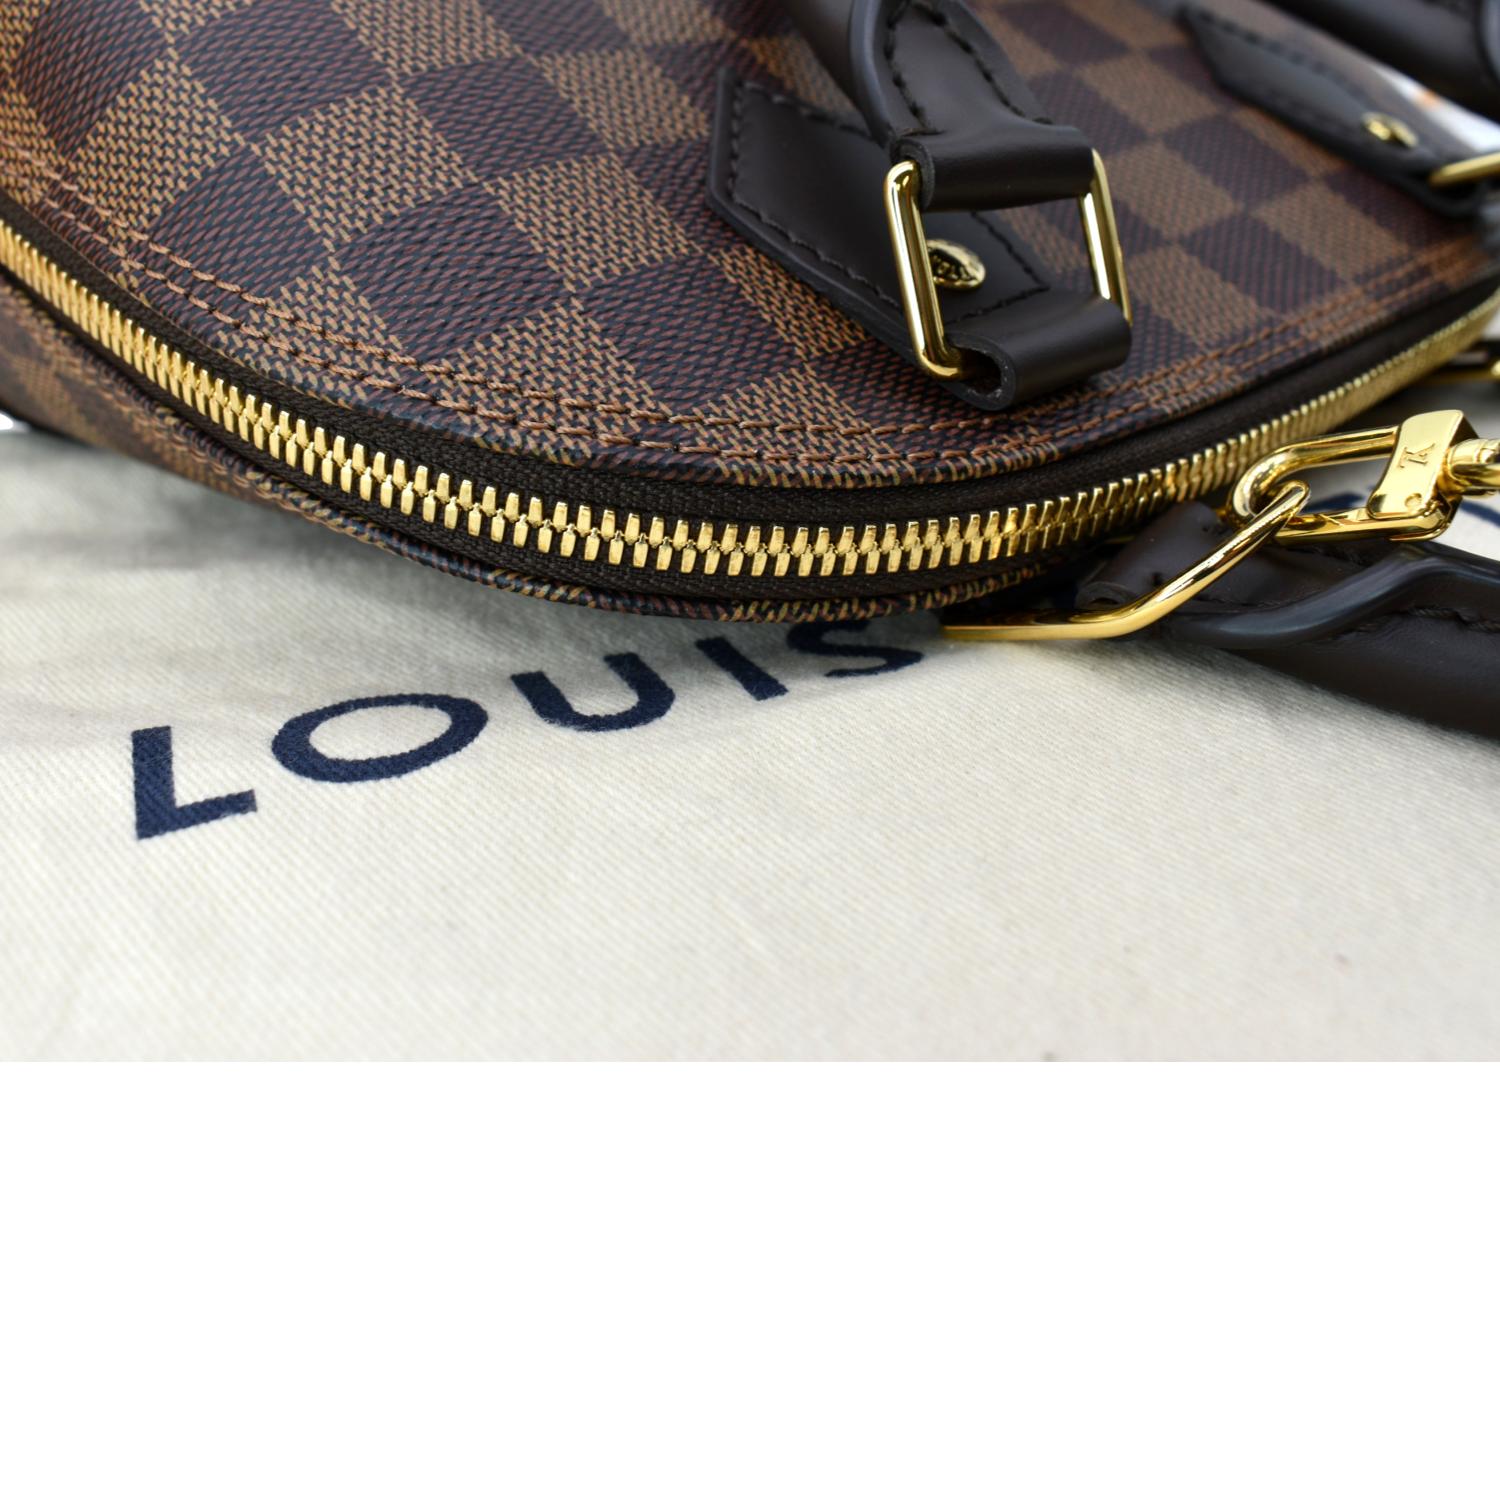 Louis Vuitton Alma BB Brand New Crossbody/Handbag - Comes with Dustbag  available online - Link to my store in my bio…